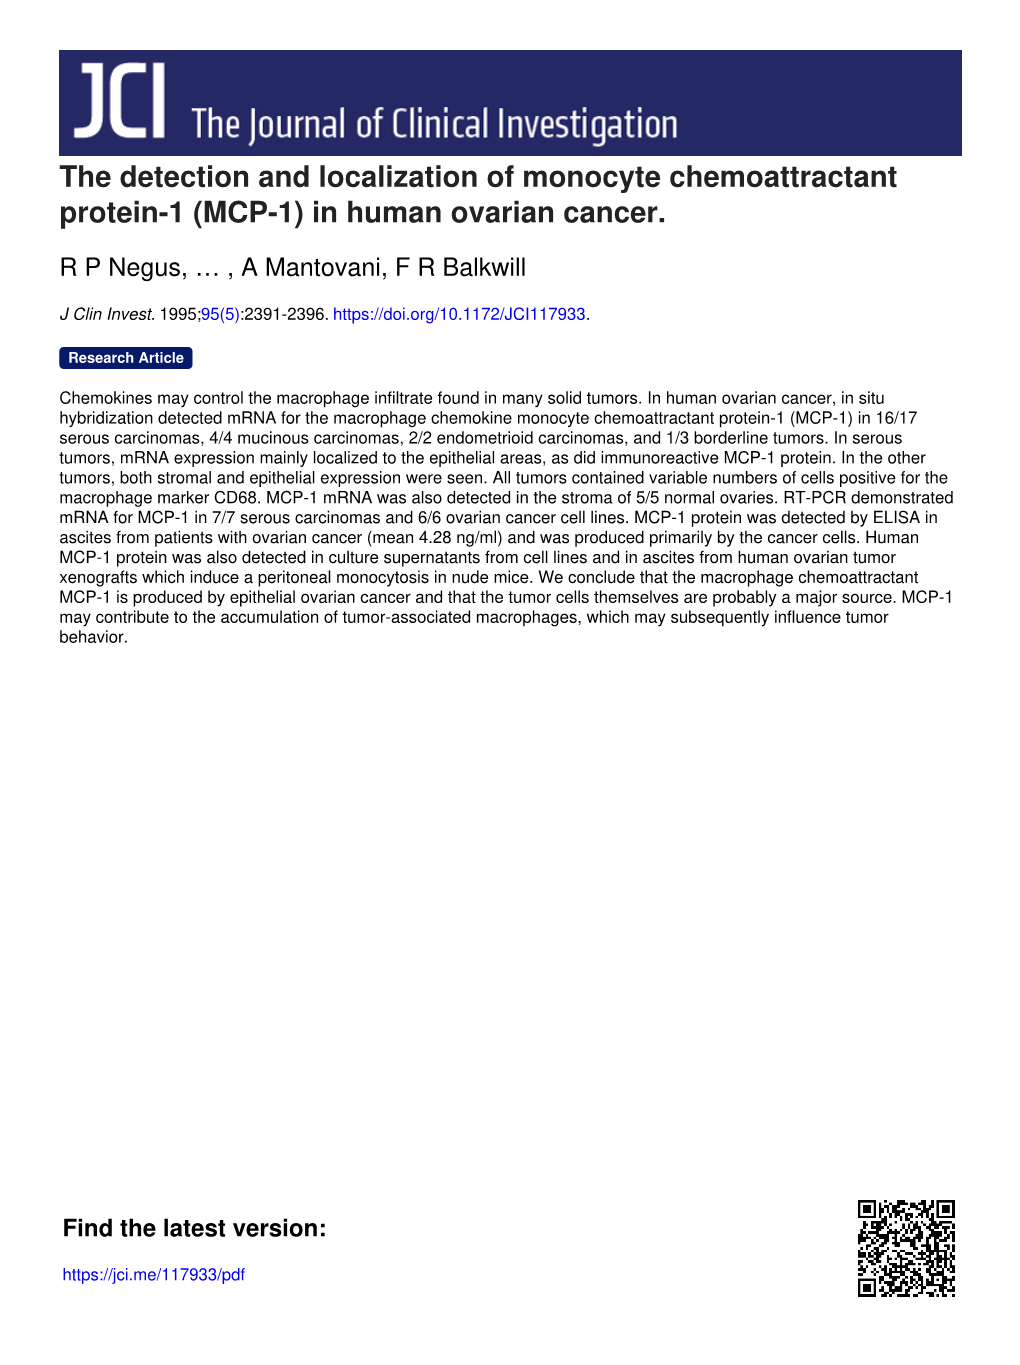 The Detection and Localization of Monocyte Chemoattractant Protein-1 (MCP-1) in Human Ovarian Cancer